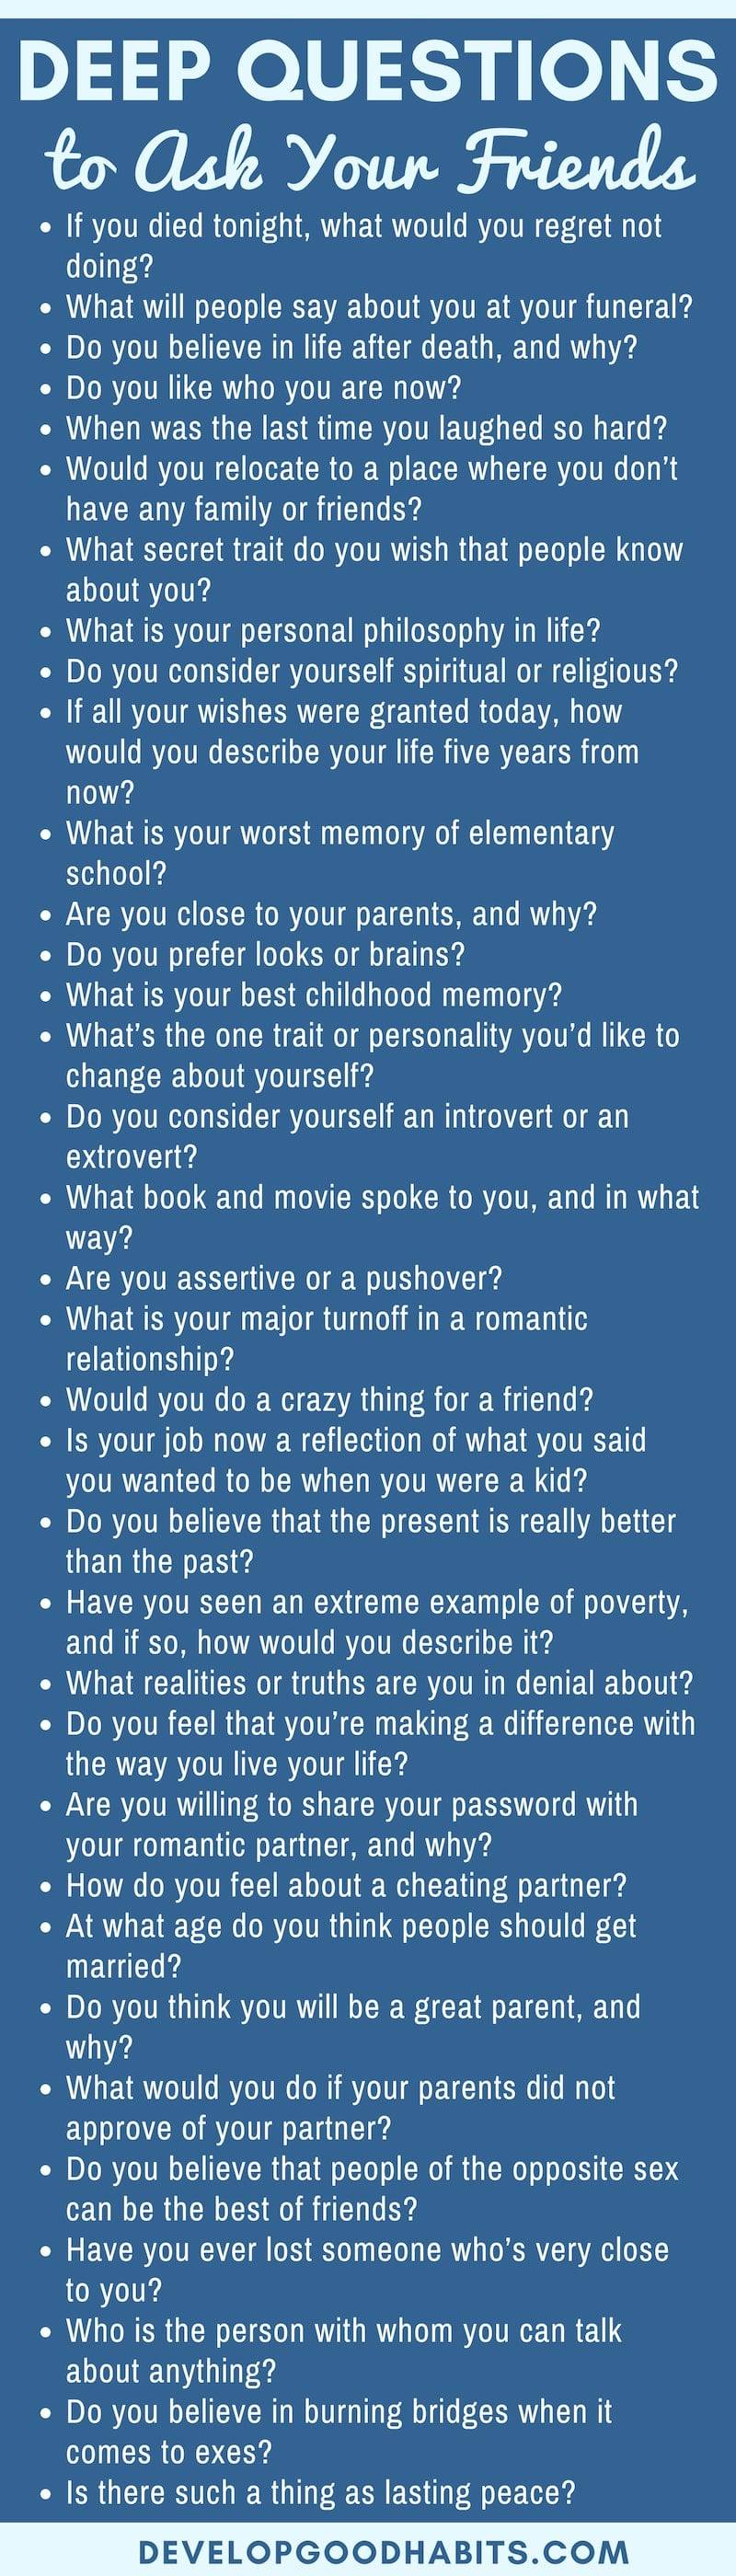 Very interesting questions to ask